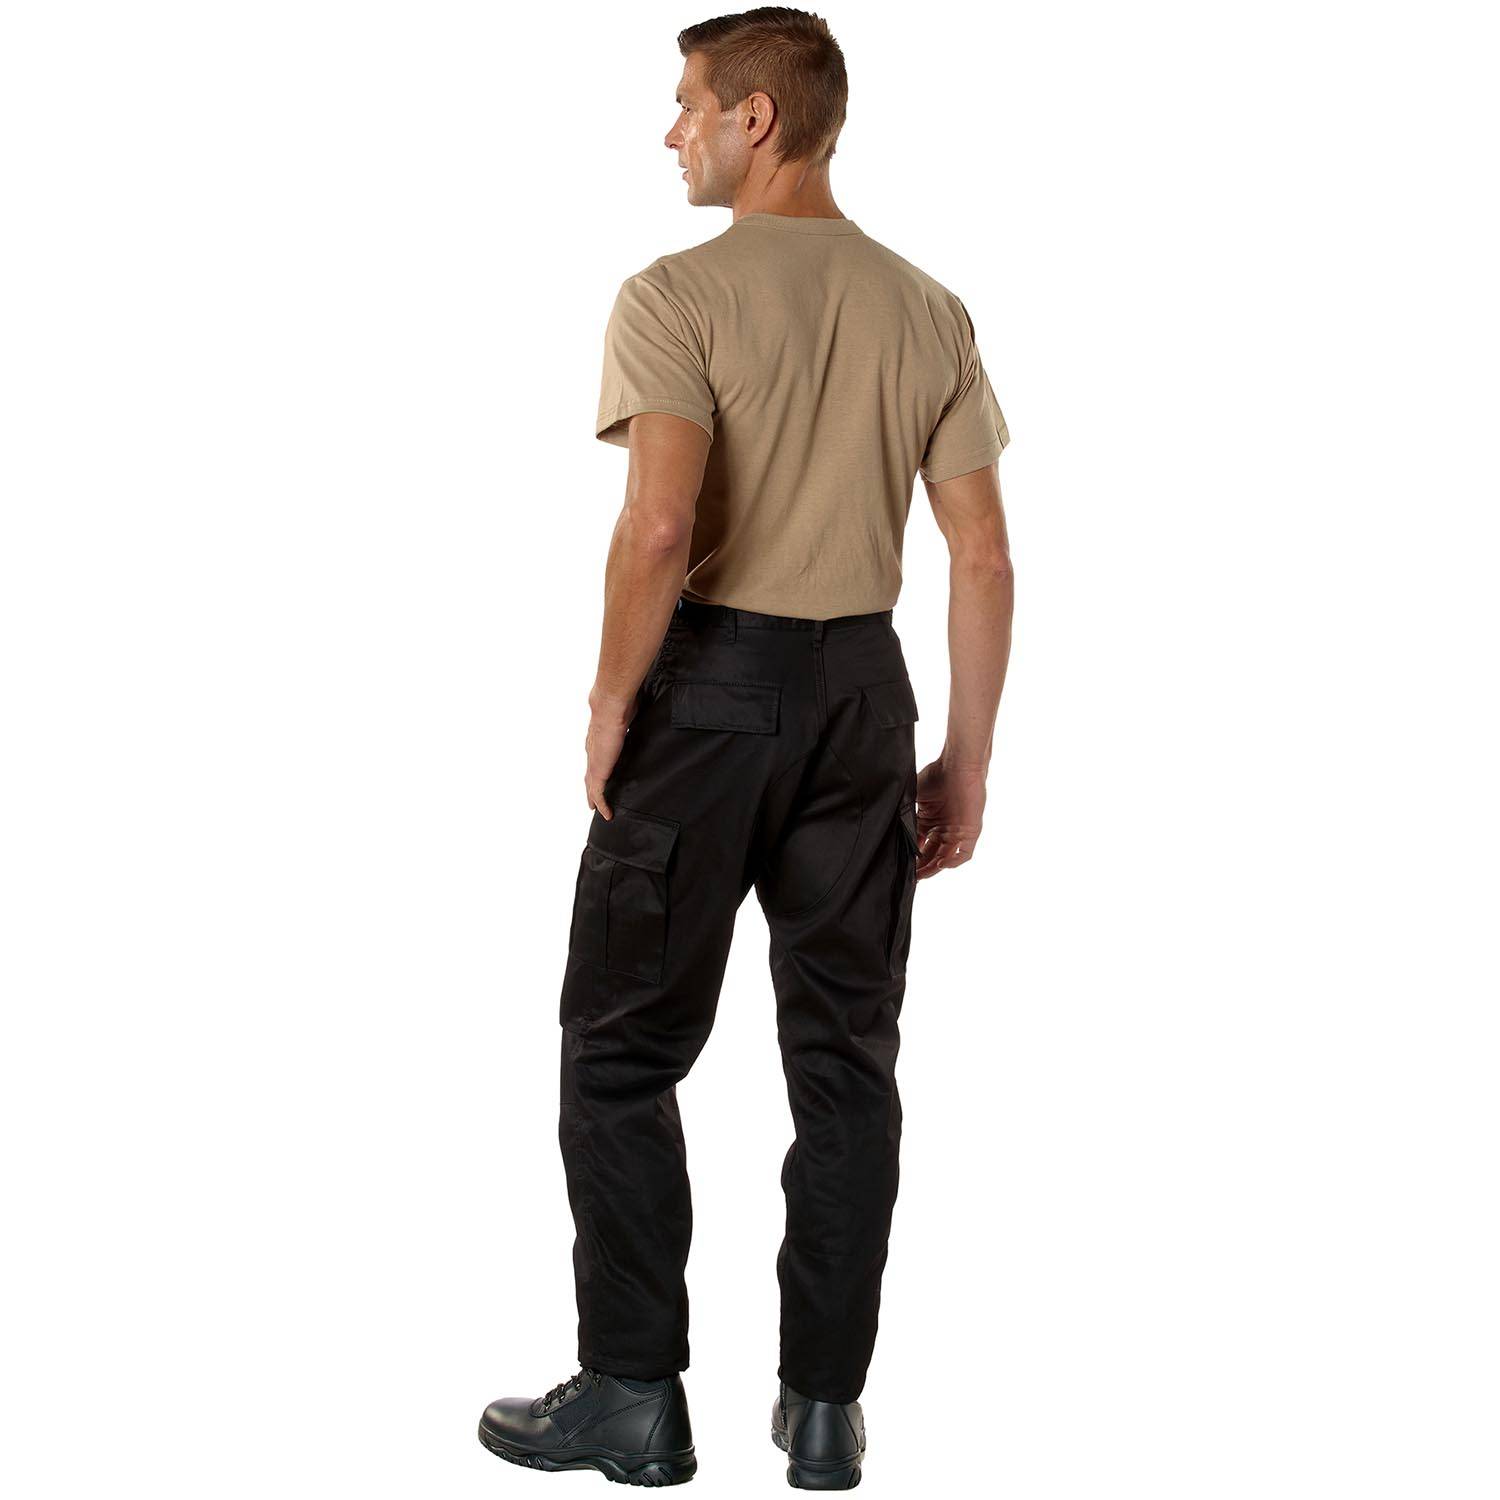 Rothco Cargo pants & Chinos, Fixed Low Prices